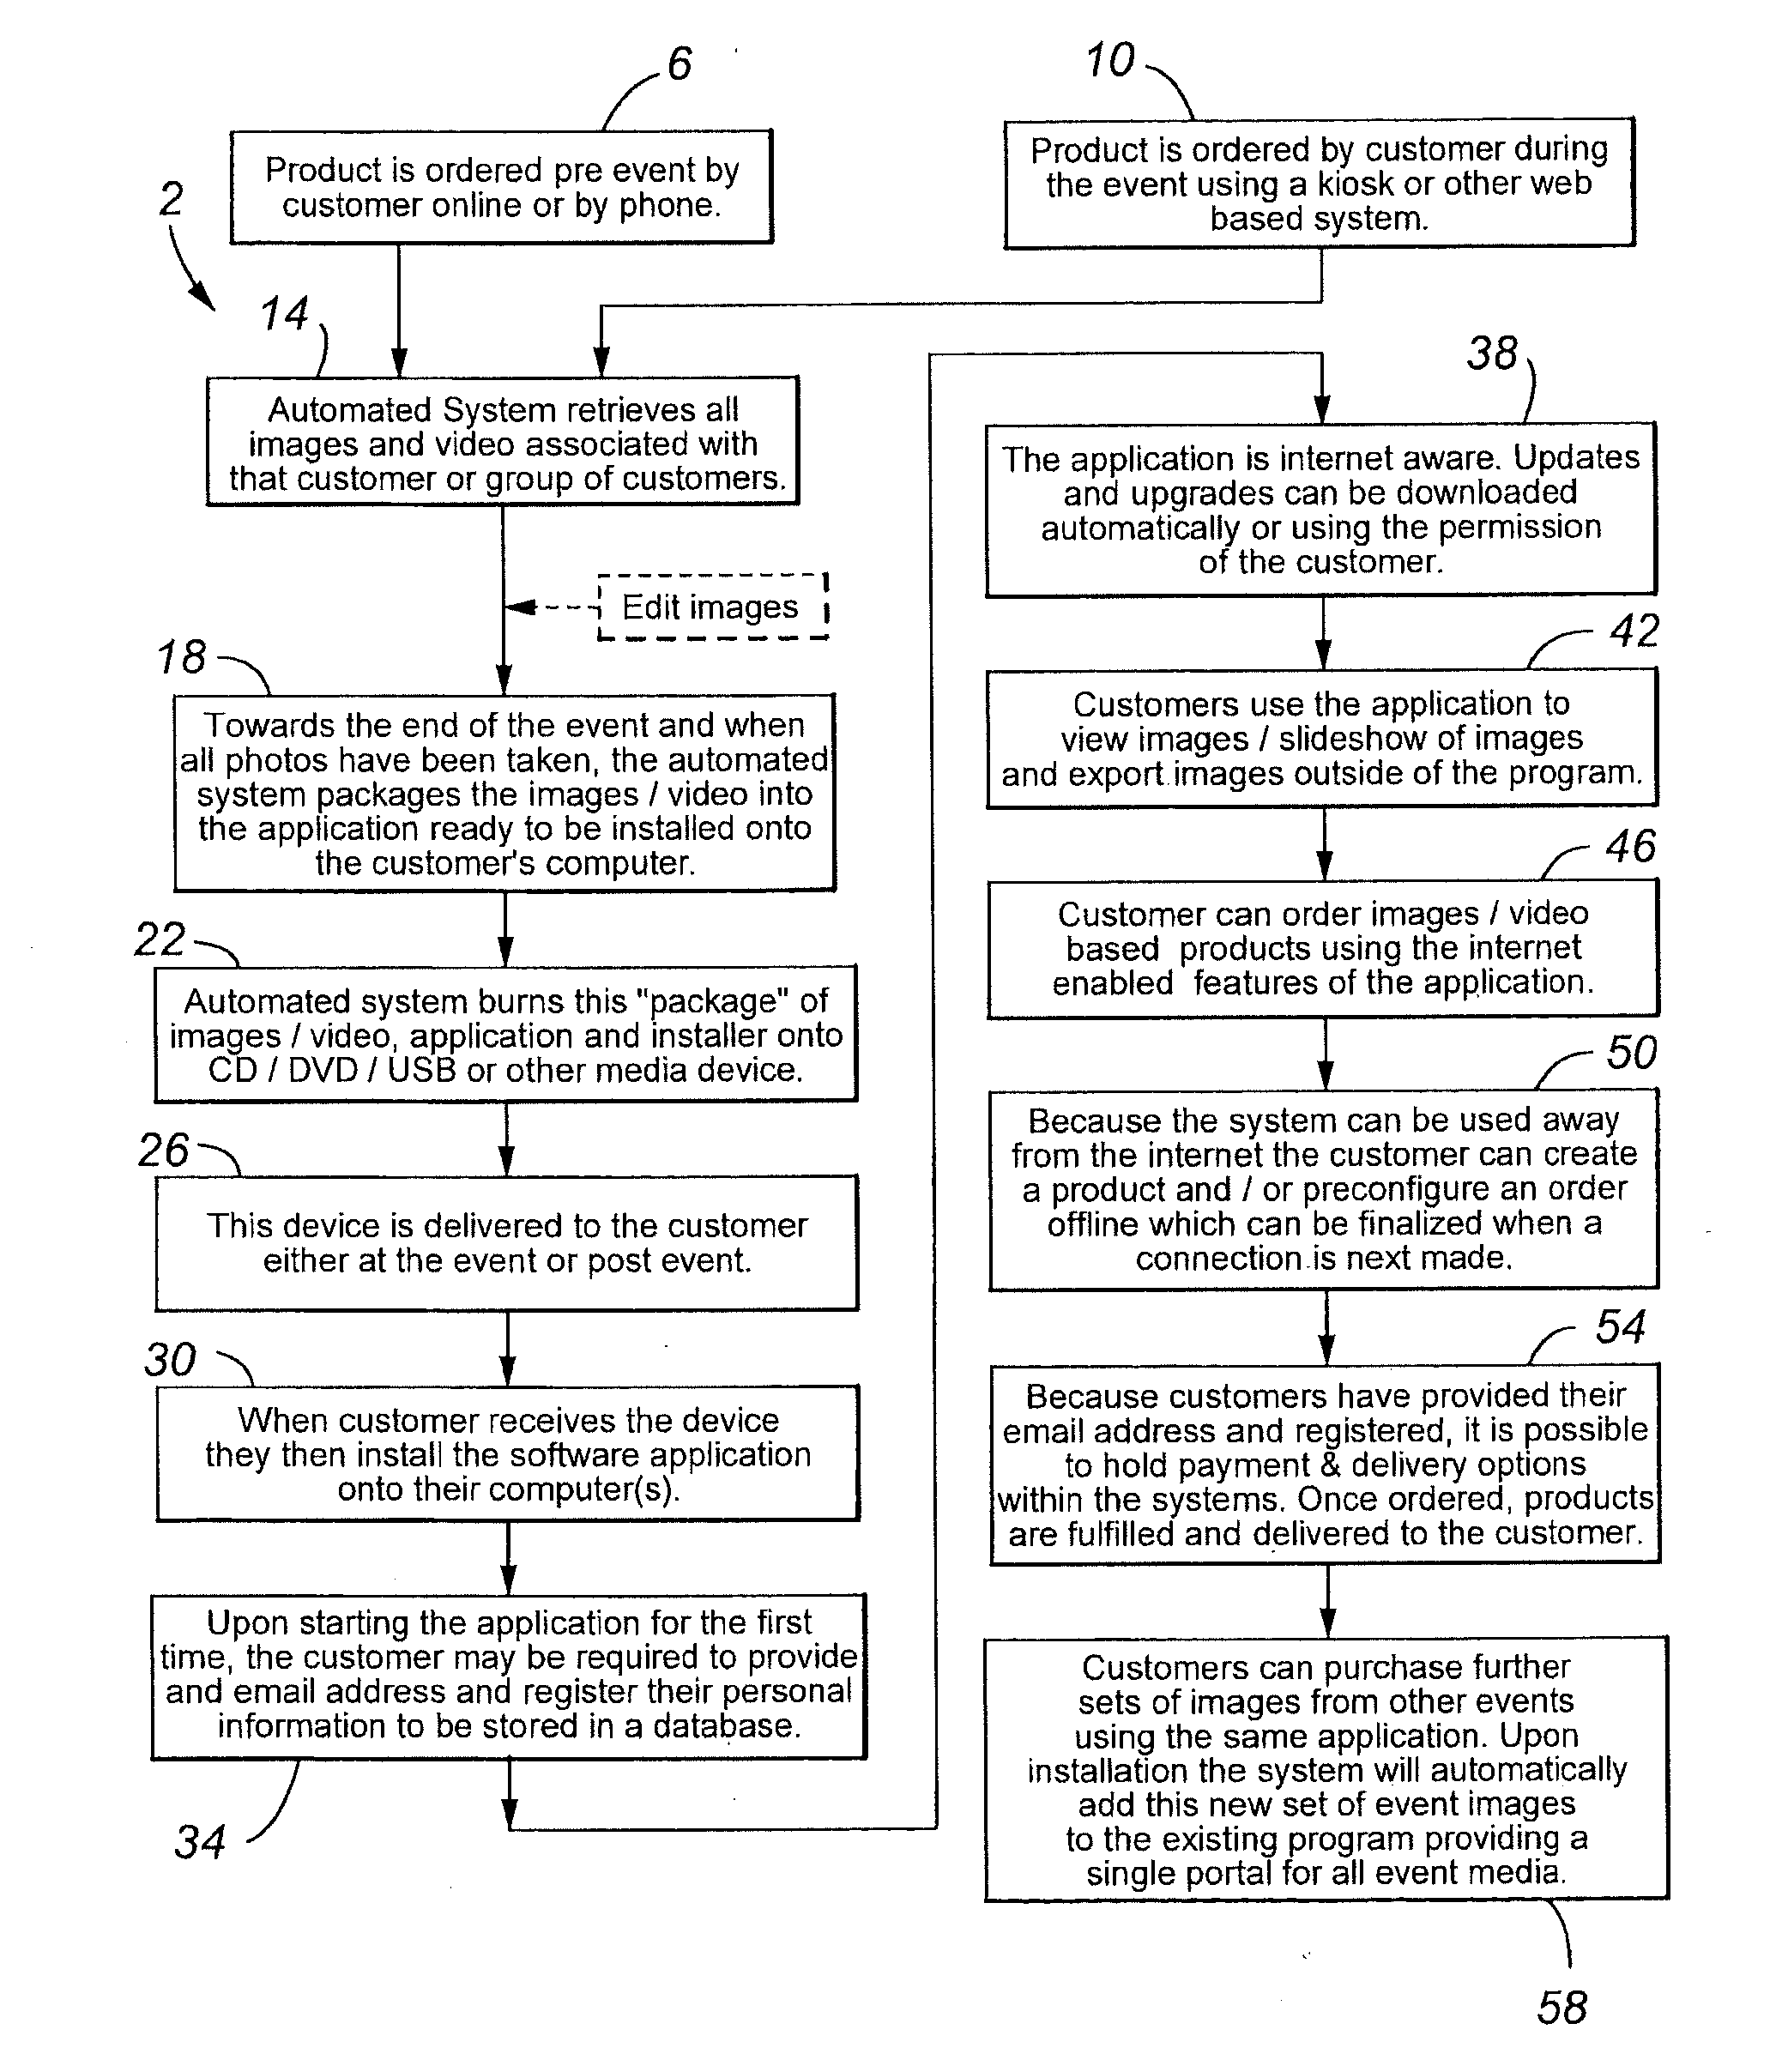 Method and system of displaying, managing and selling images in an event photography environment